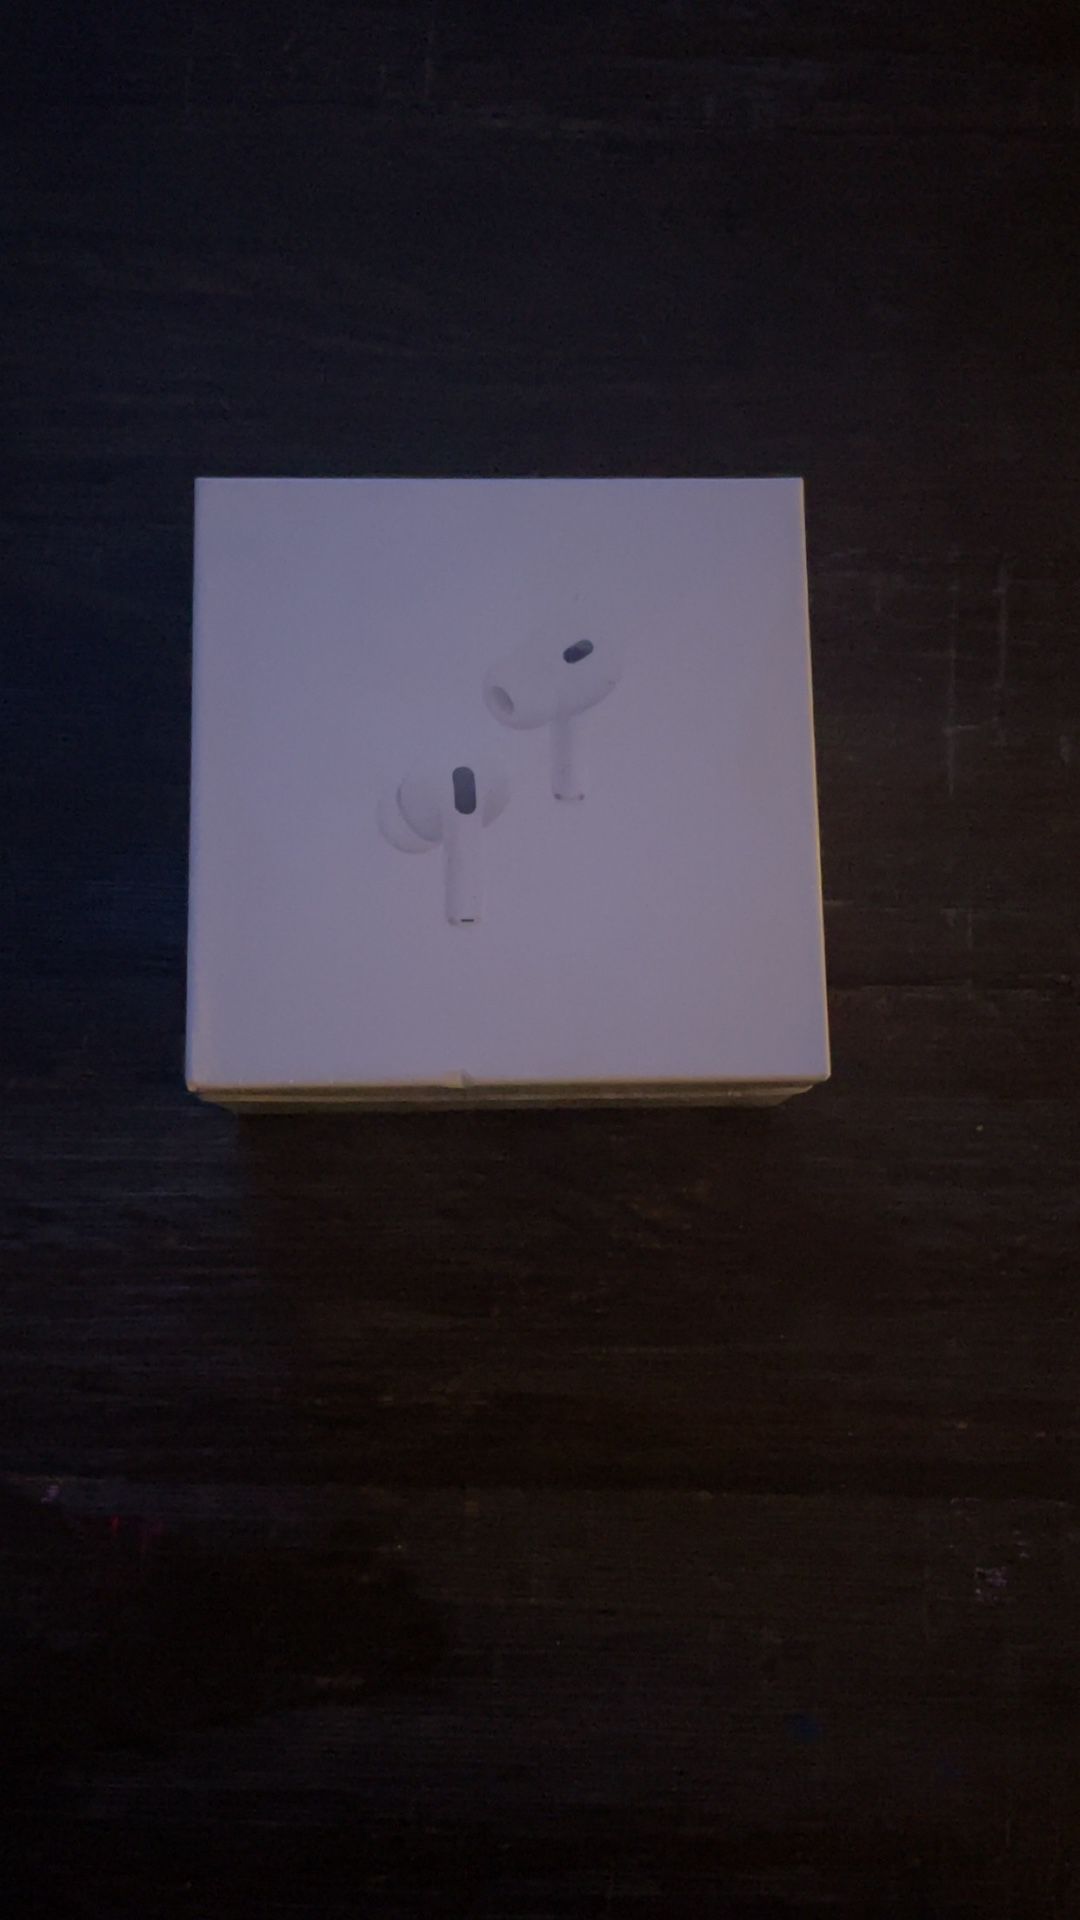 Second Generation (Earbuds)